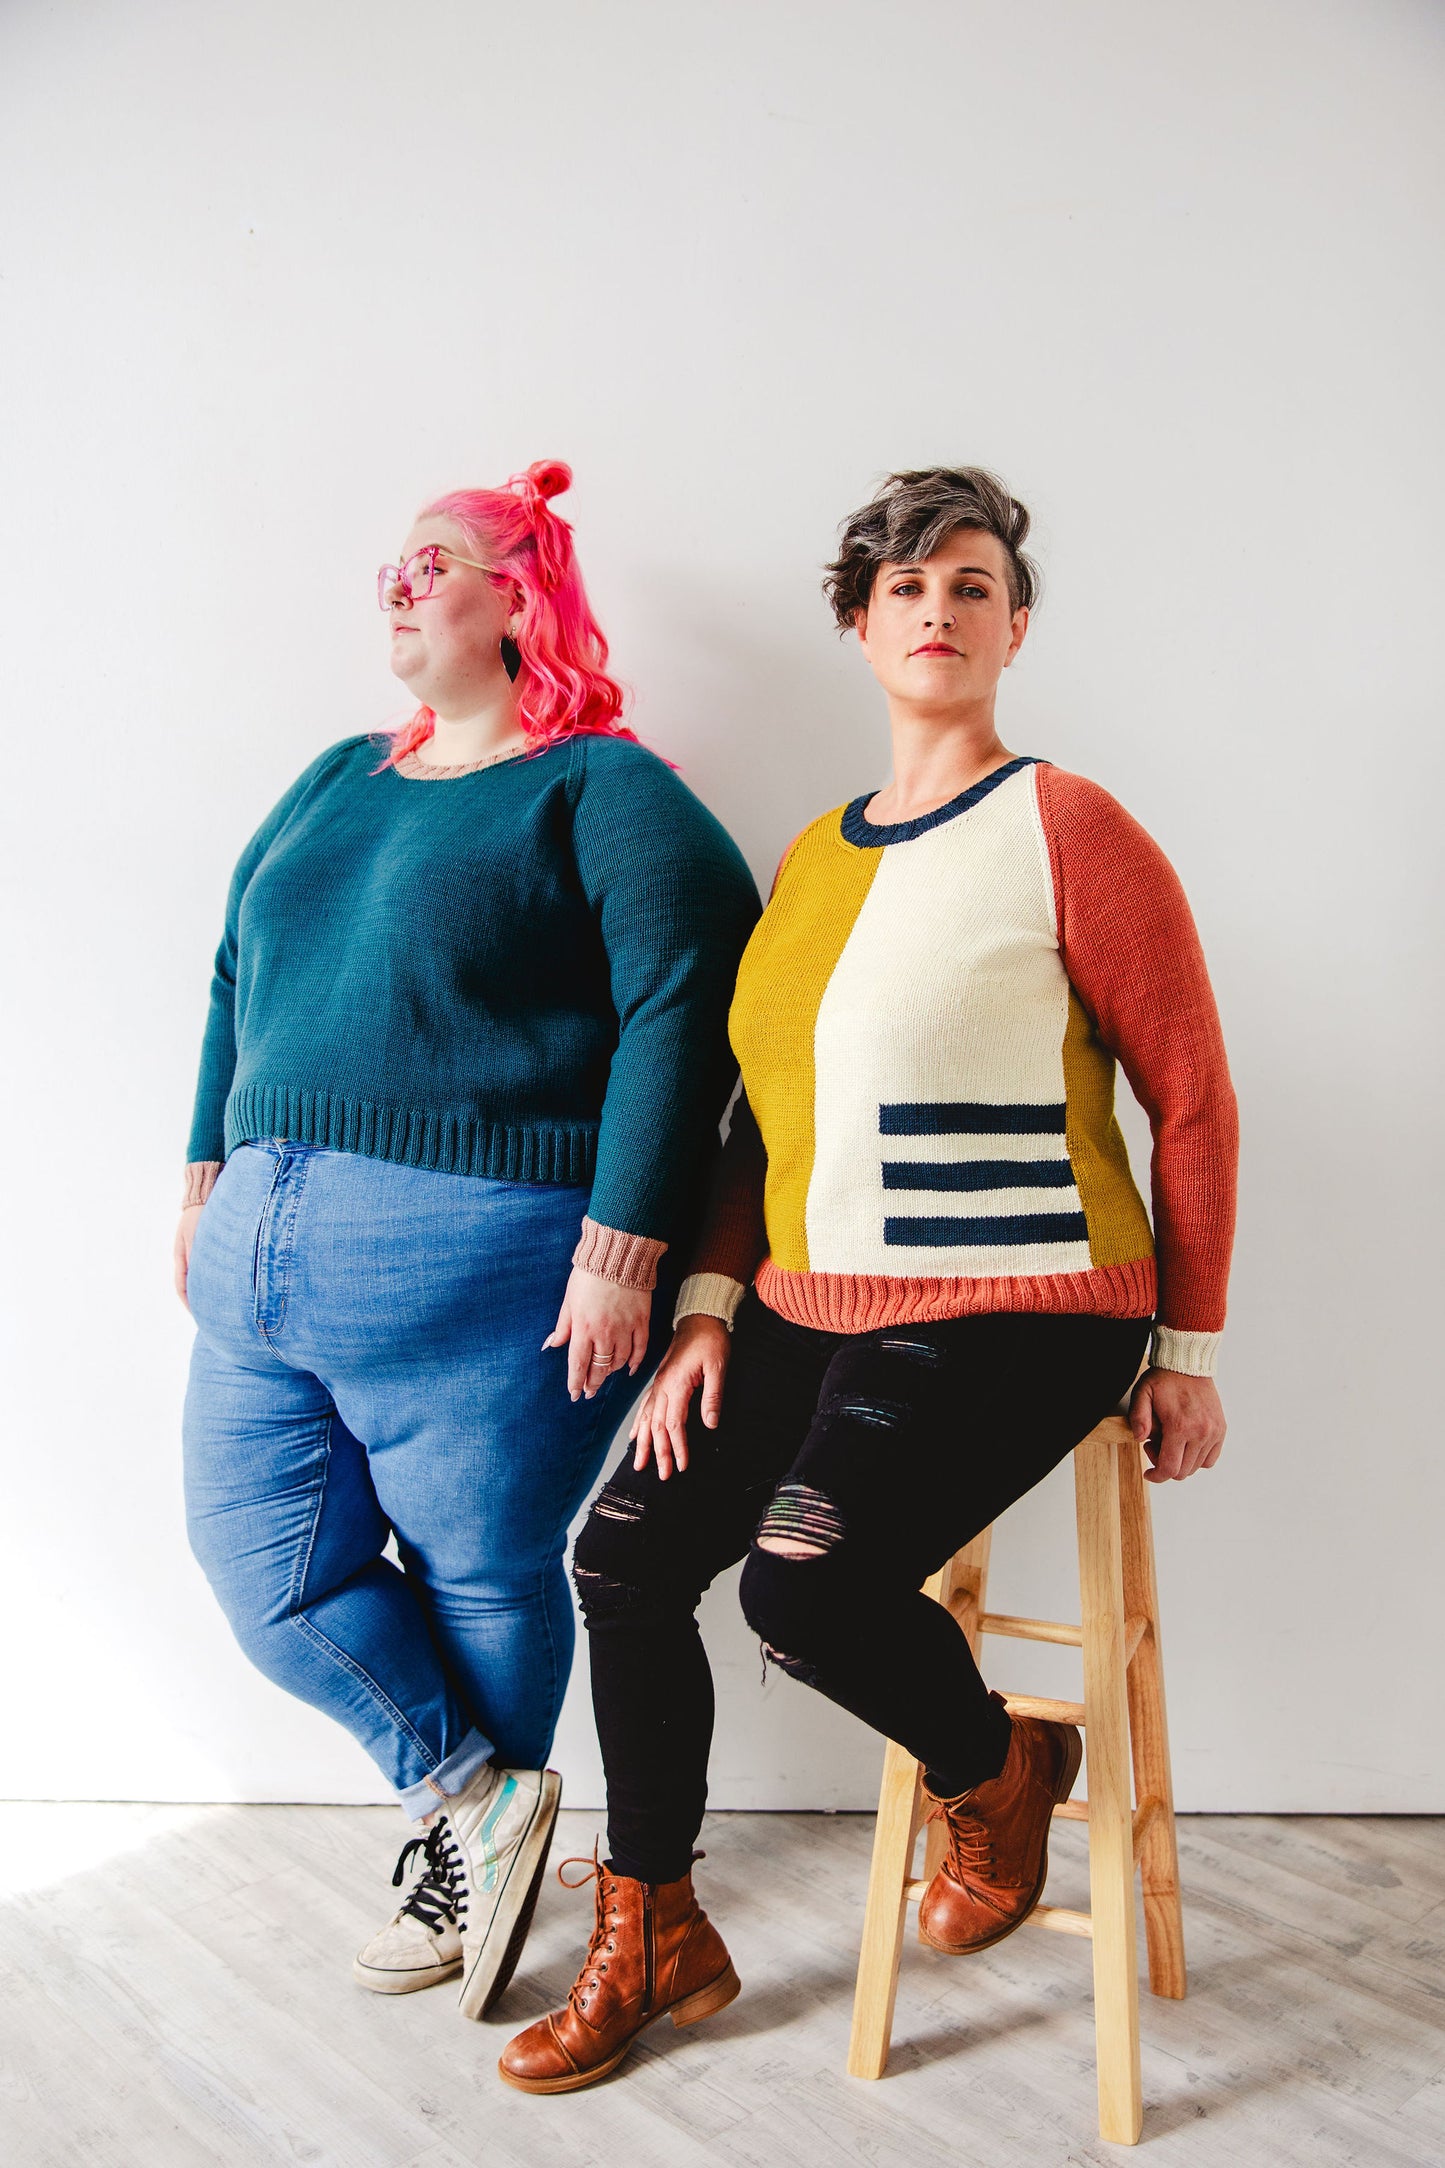 Jen sits on a stool, looking at the camera, while Courtney stands beside her. Jen's sweater was knit using intarsia techniques in navy, white, ochre, and pink yarn. Courtney's sweater is knit with teal yarn and pink accents on the cuffs.